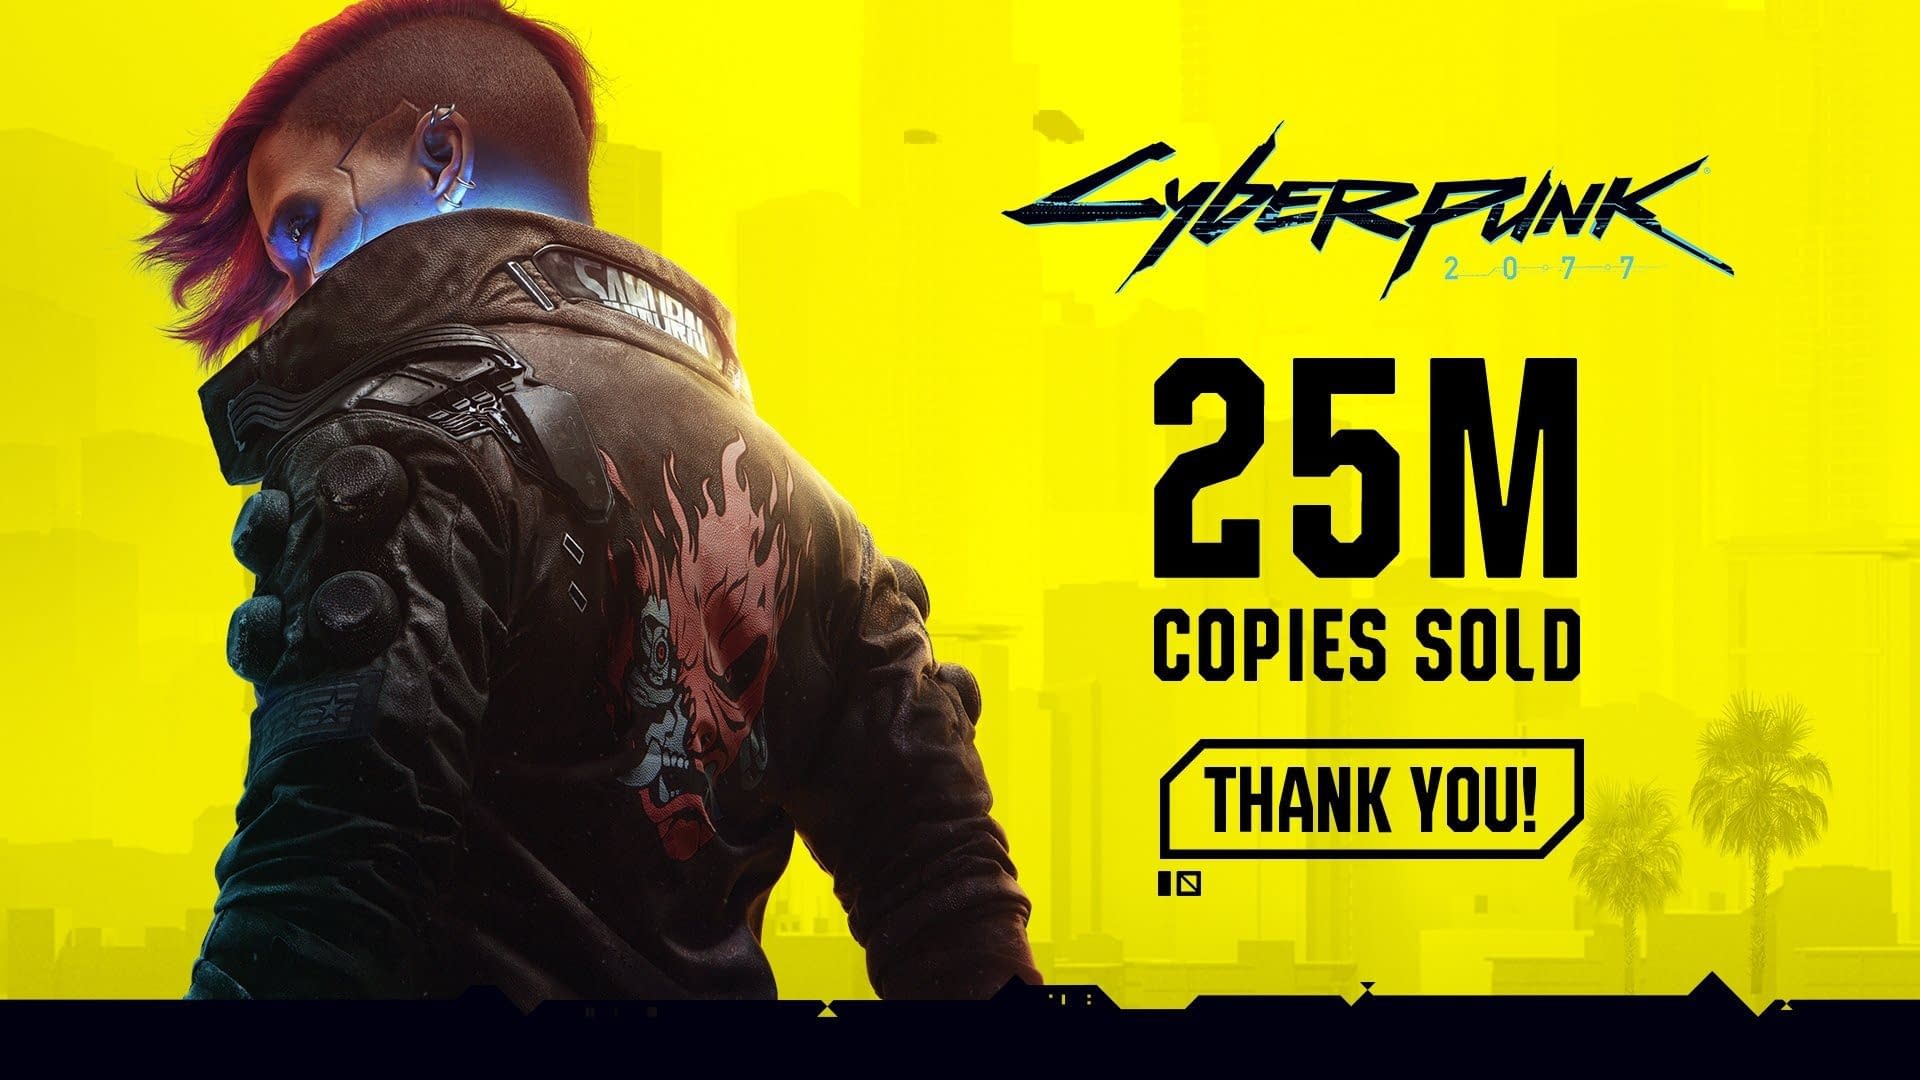 New Record from Cyberpunk 2077: Reached 25 Million Sales!